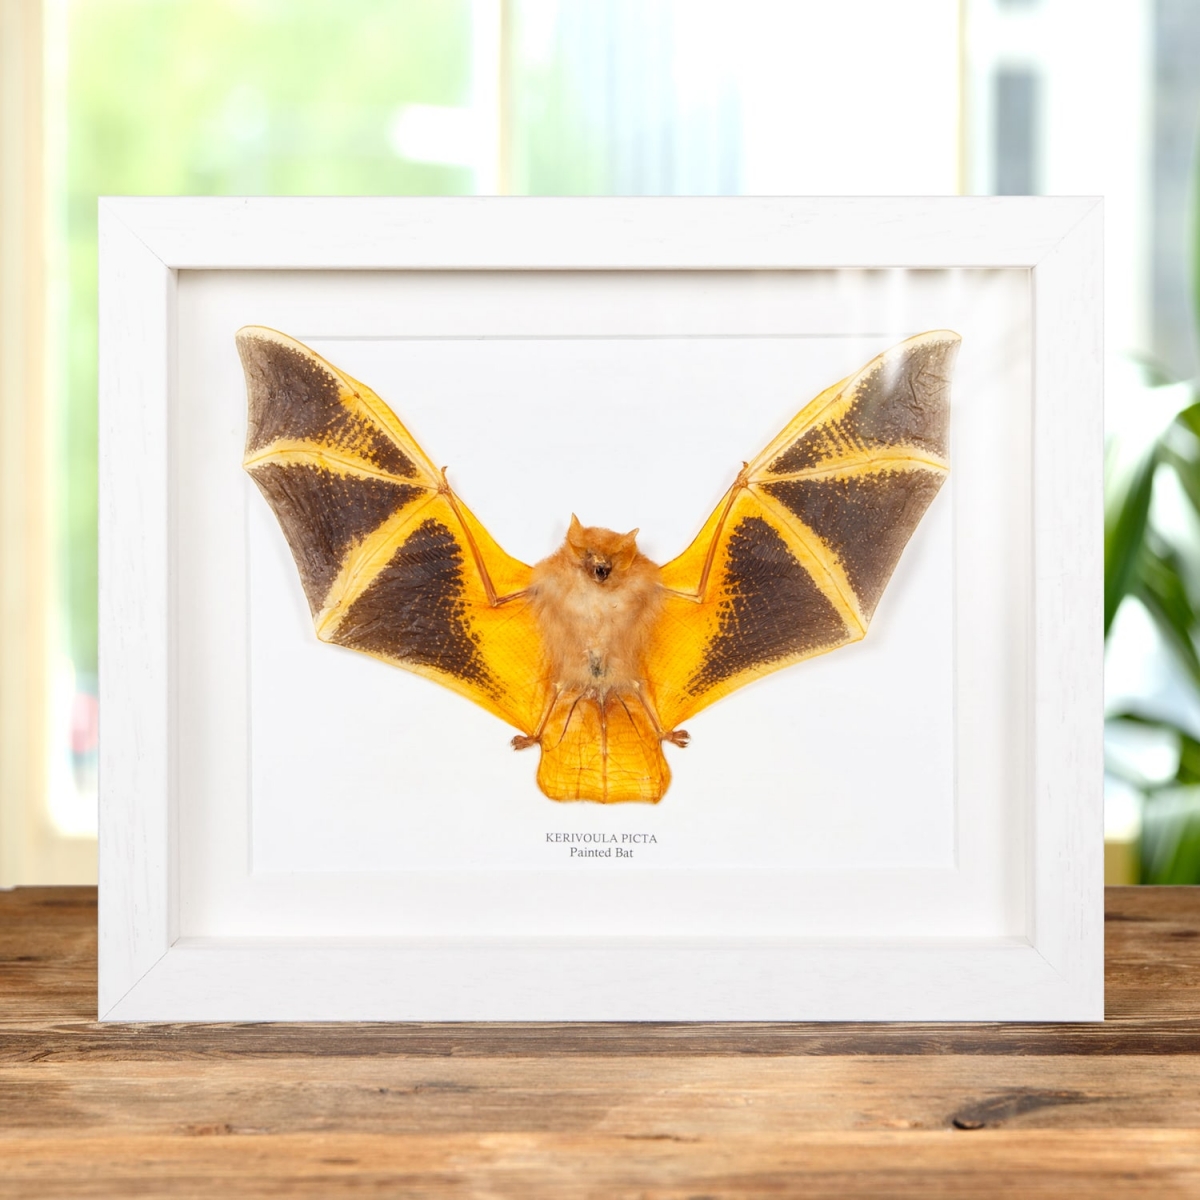 Taxidermy Painted Bat in Box Frame (Kerivoula picta)